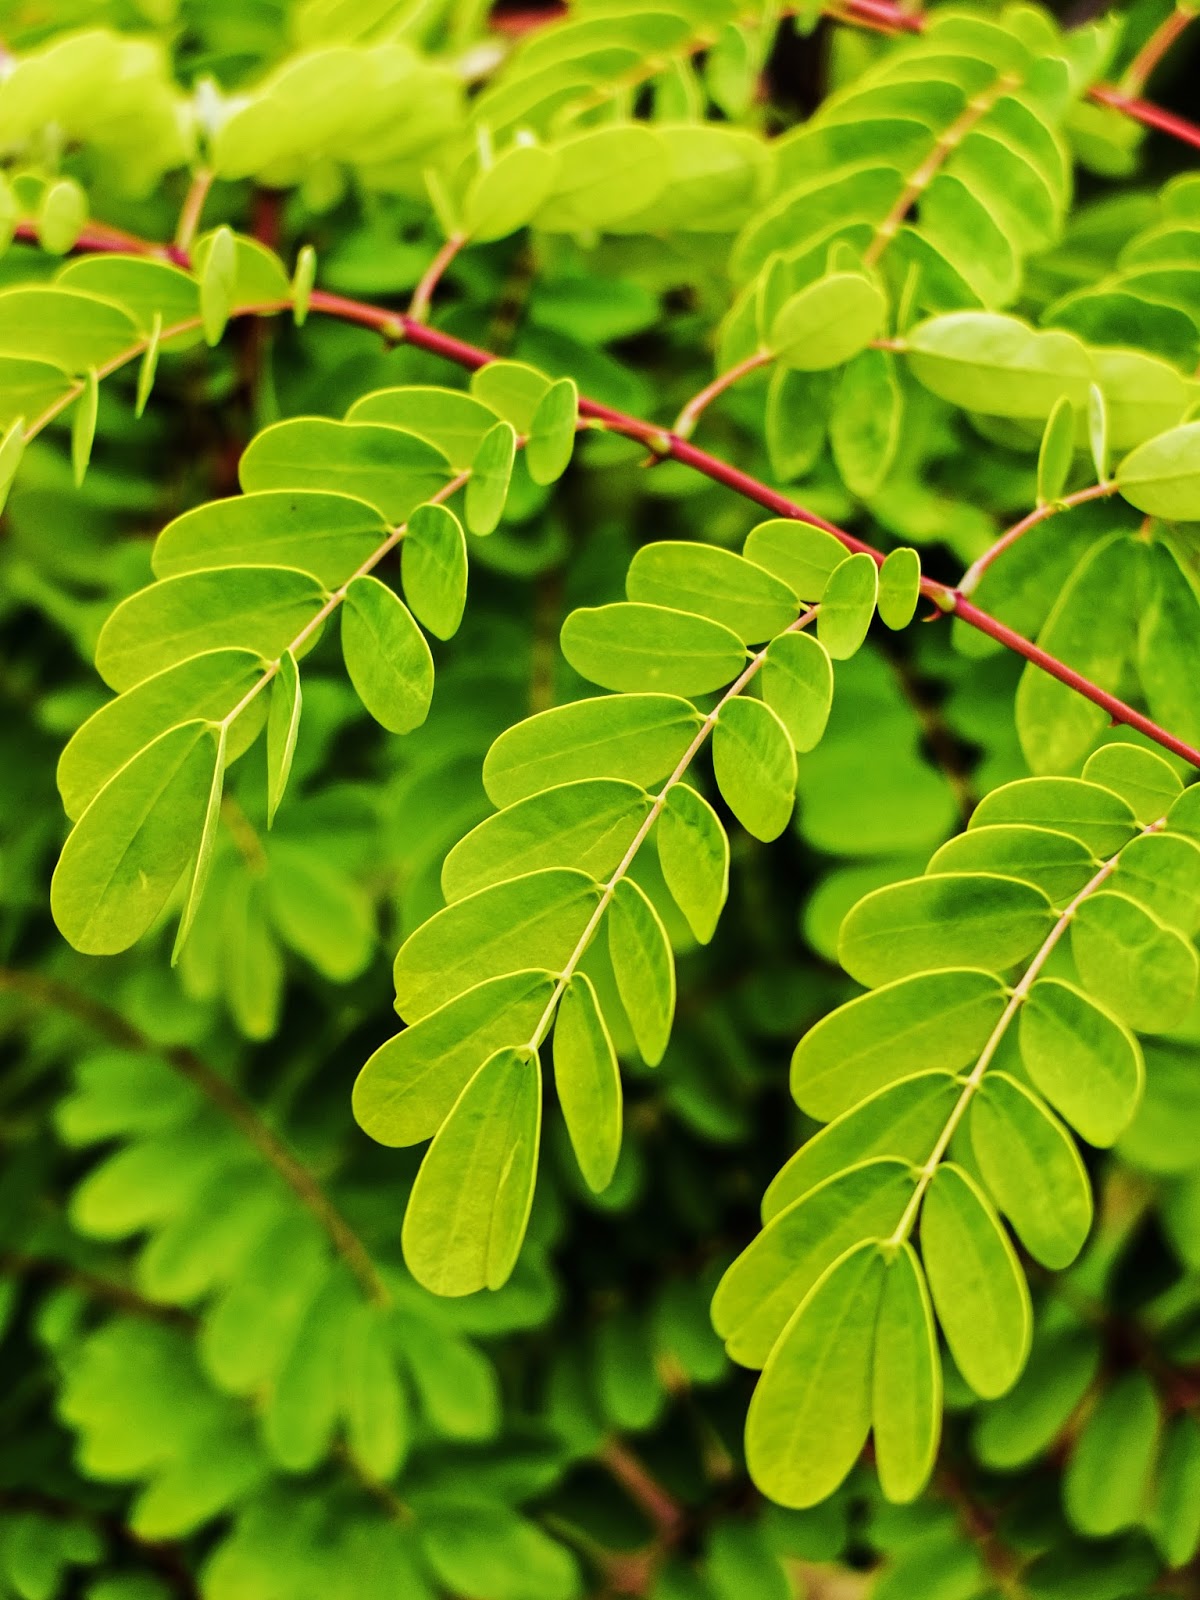 Close up of leaves of an Acacia tree in Fota Gardens, Co.Cork.